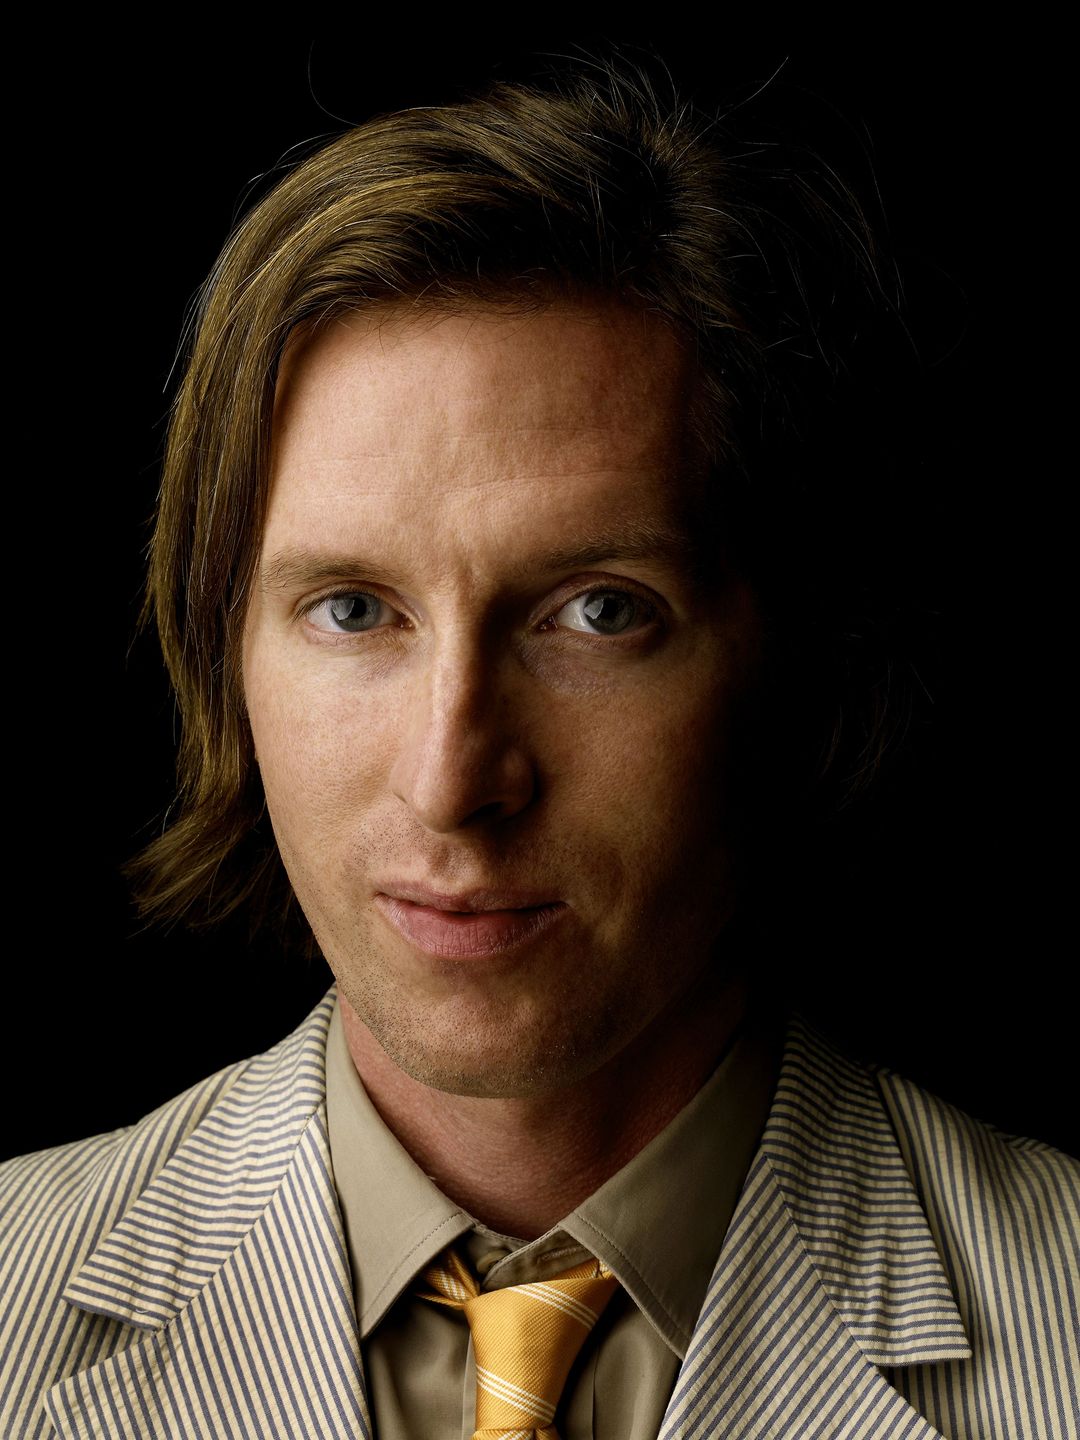 Wes Anderson way to fame